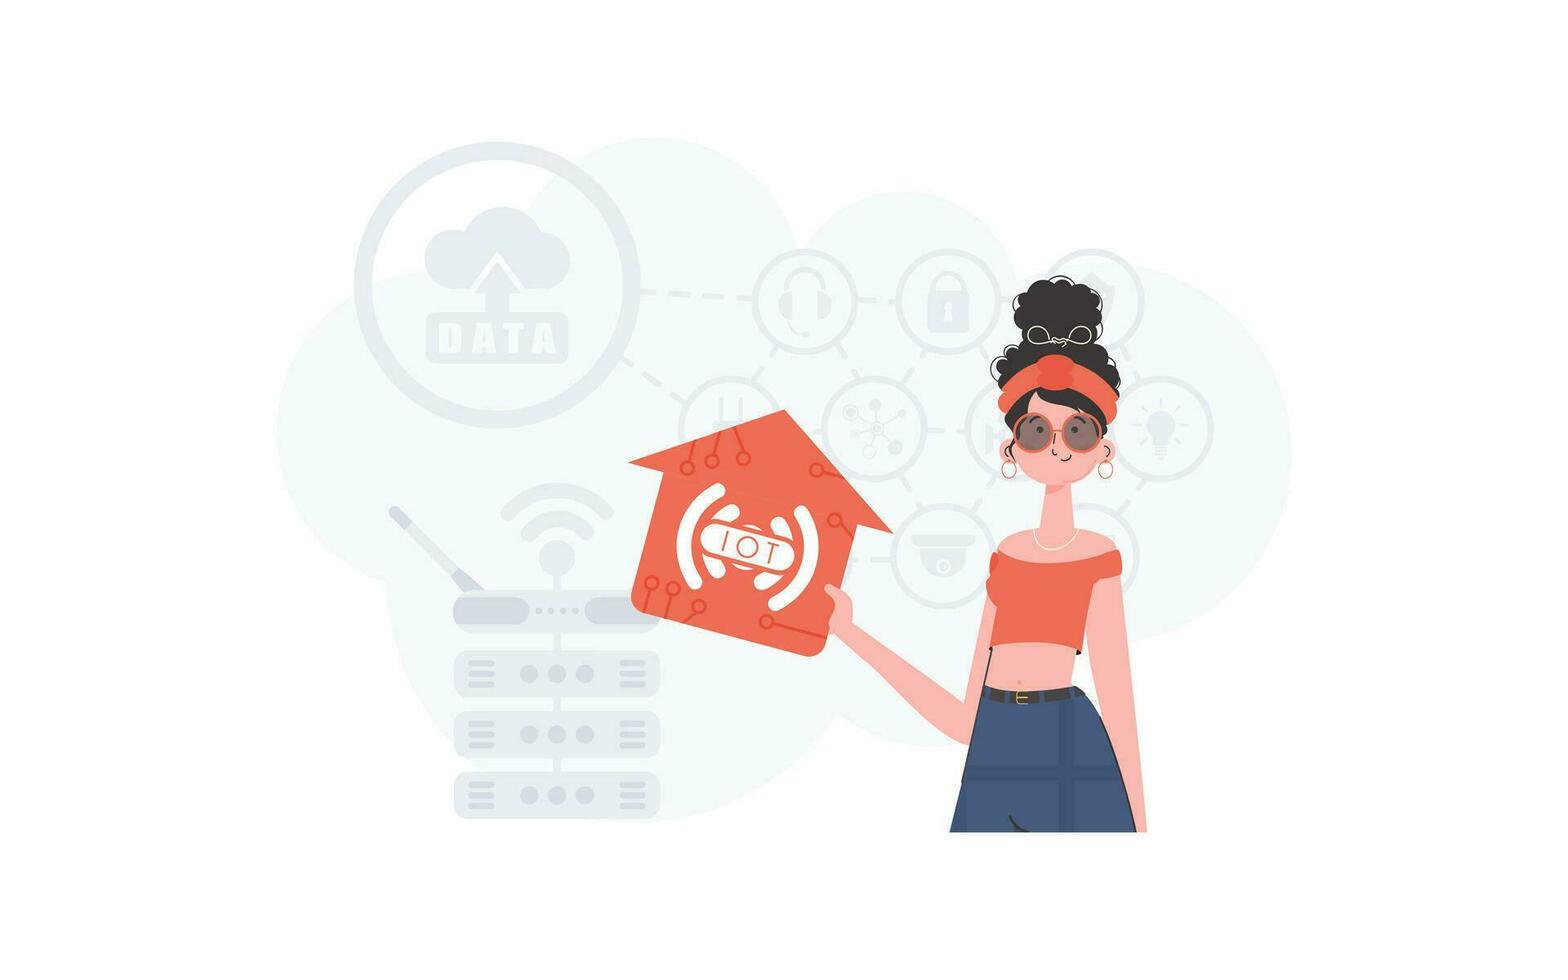 The woman is depicted waist-deep, holding an icon of a house in her hands. IoT concept. Good for presentations and websites. Vector illustration in trendy flat style.